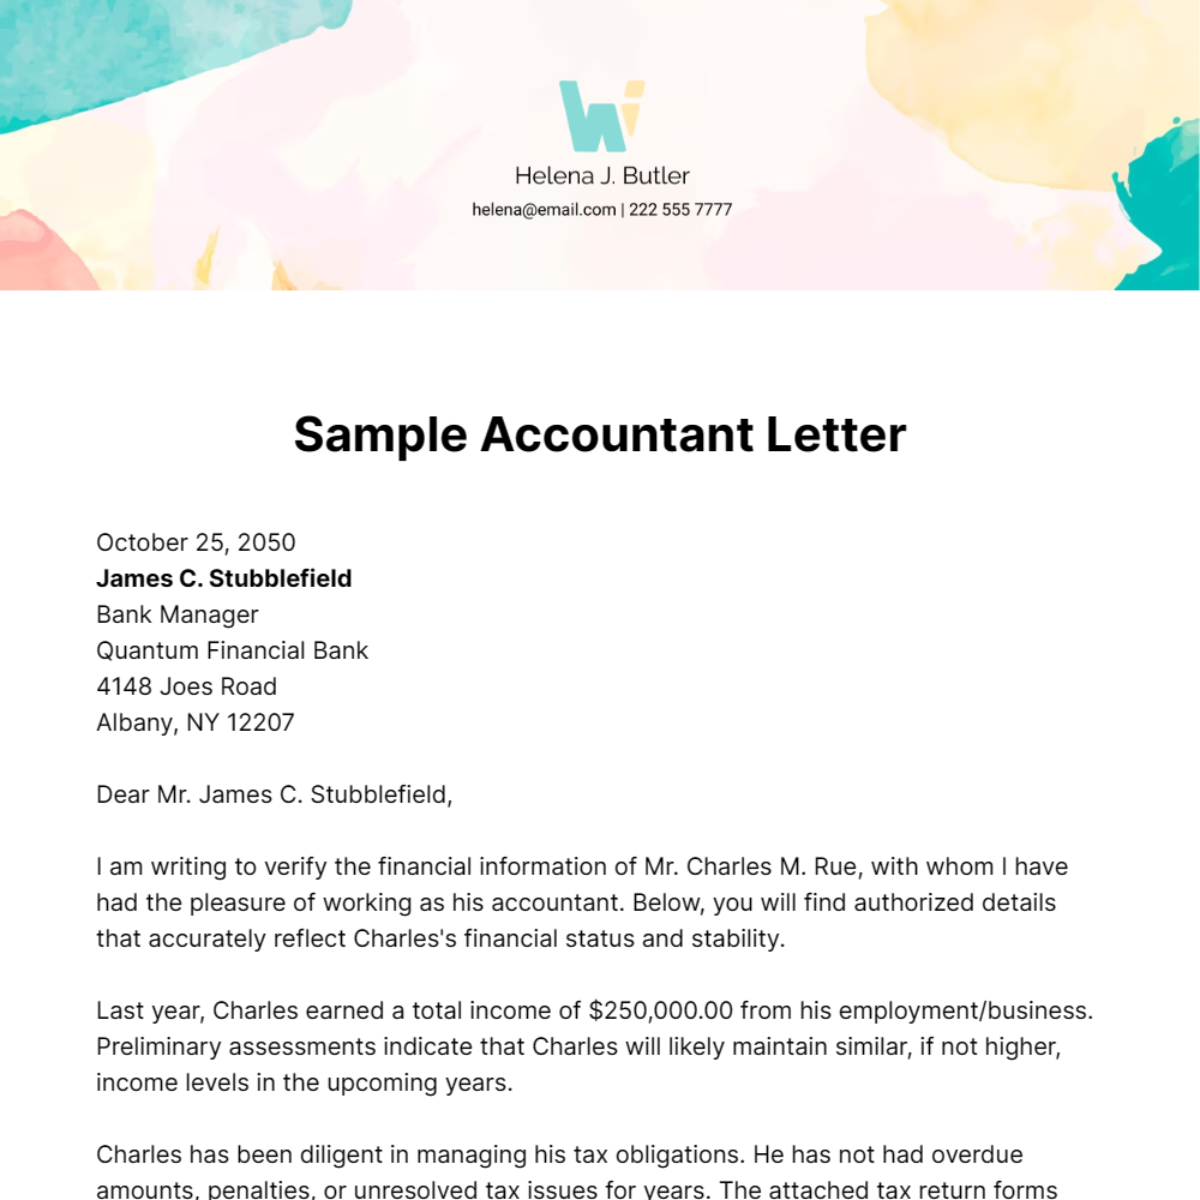 Sample Accountant Letter Template